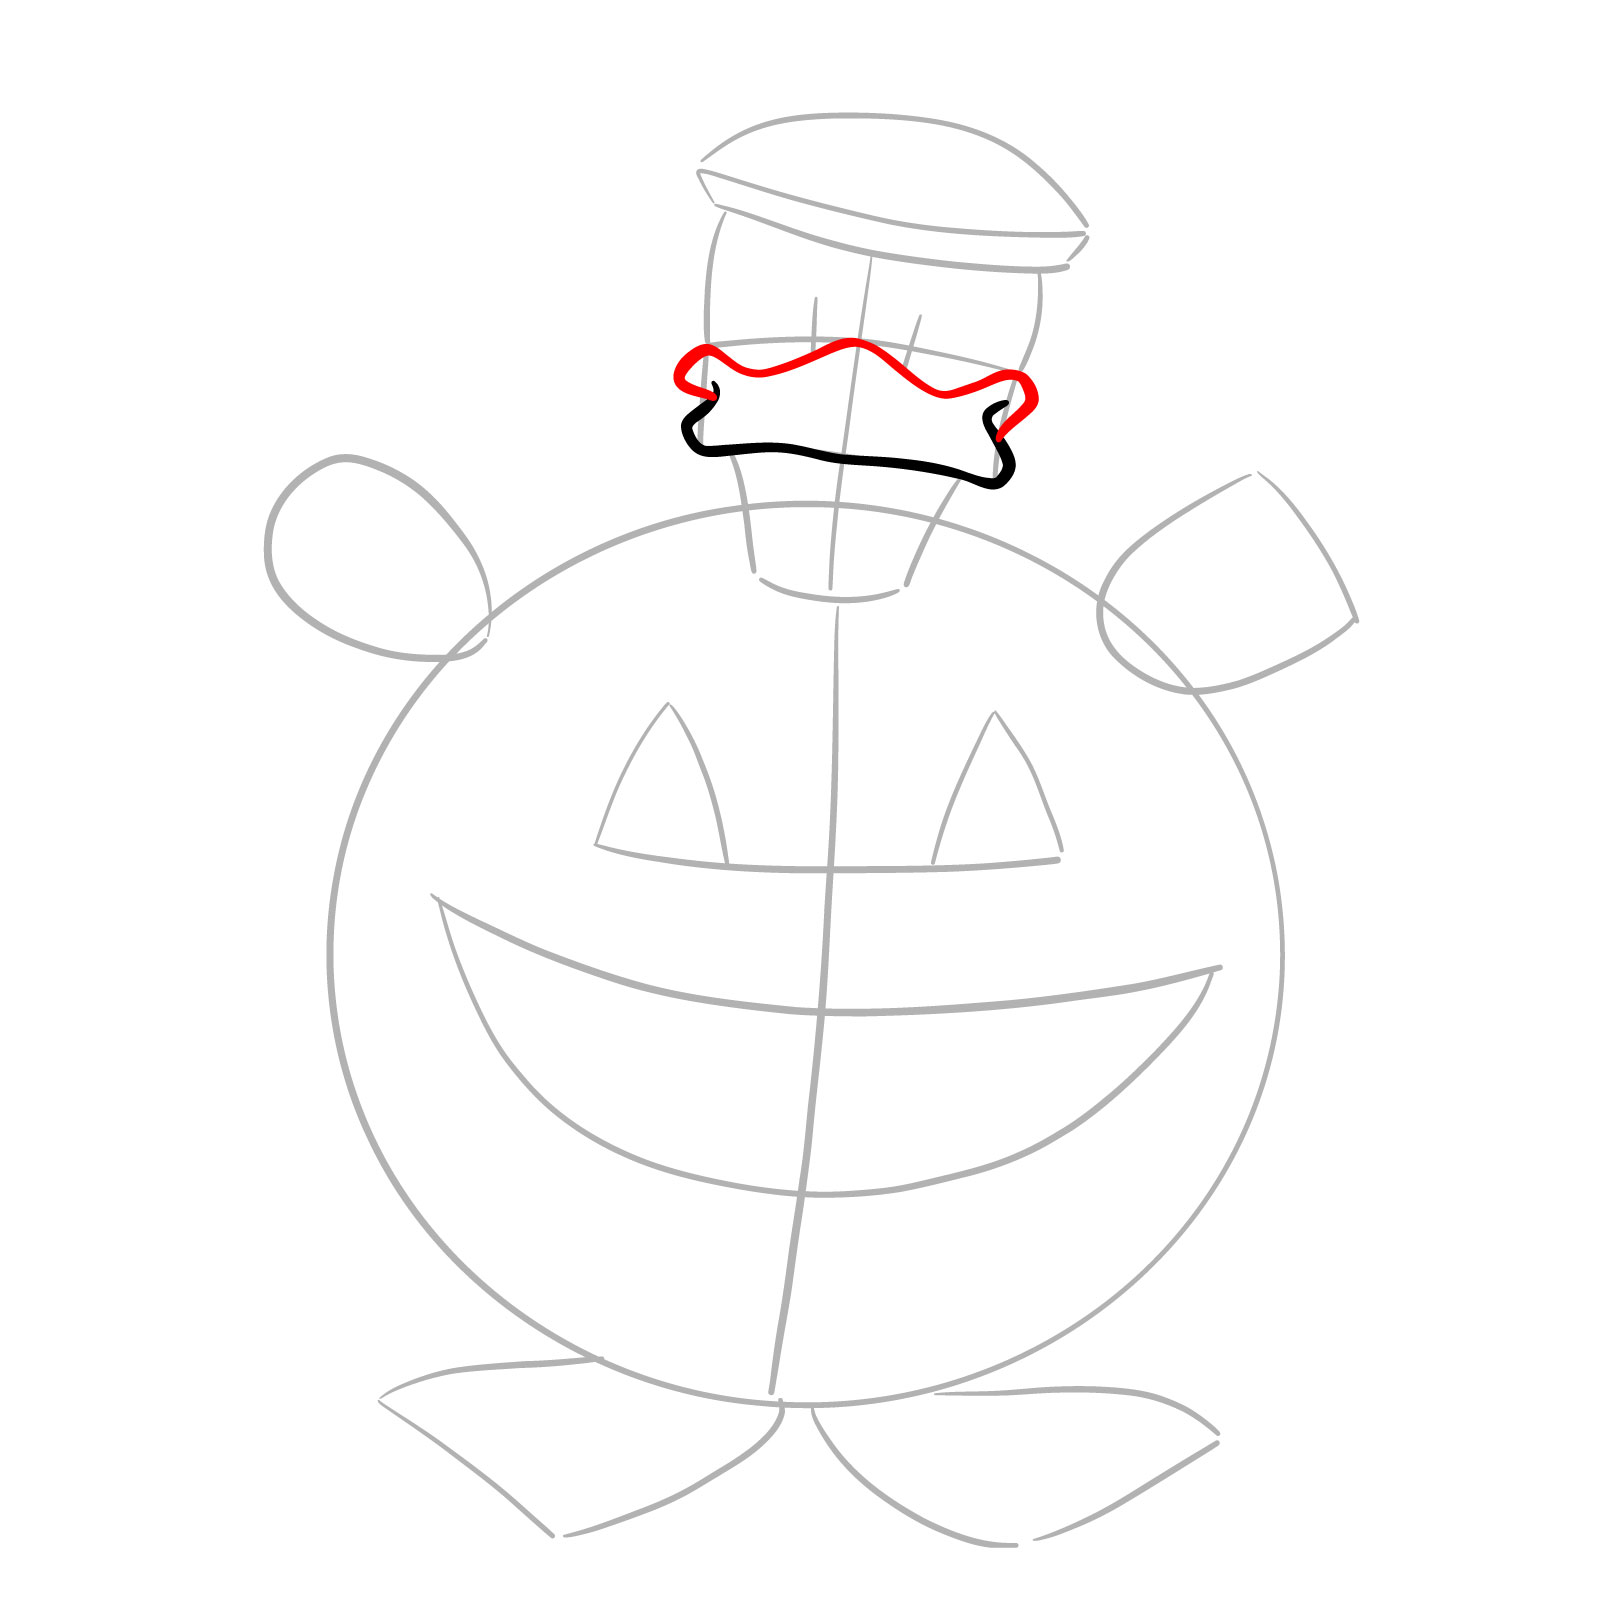 How to draw Halloween Donald Duck in a jack o'lantern - step 05